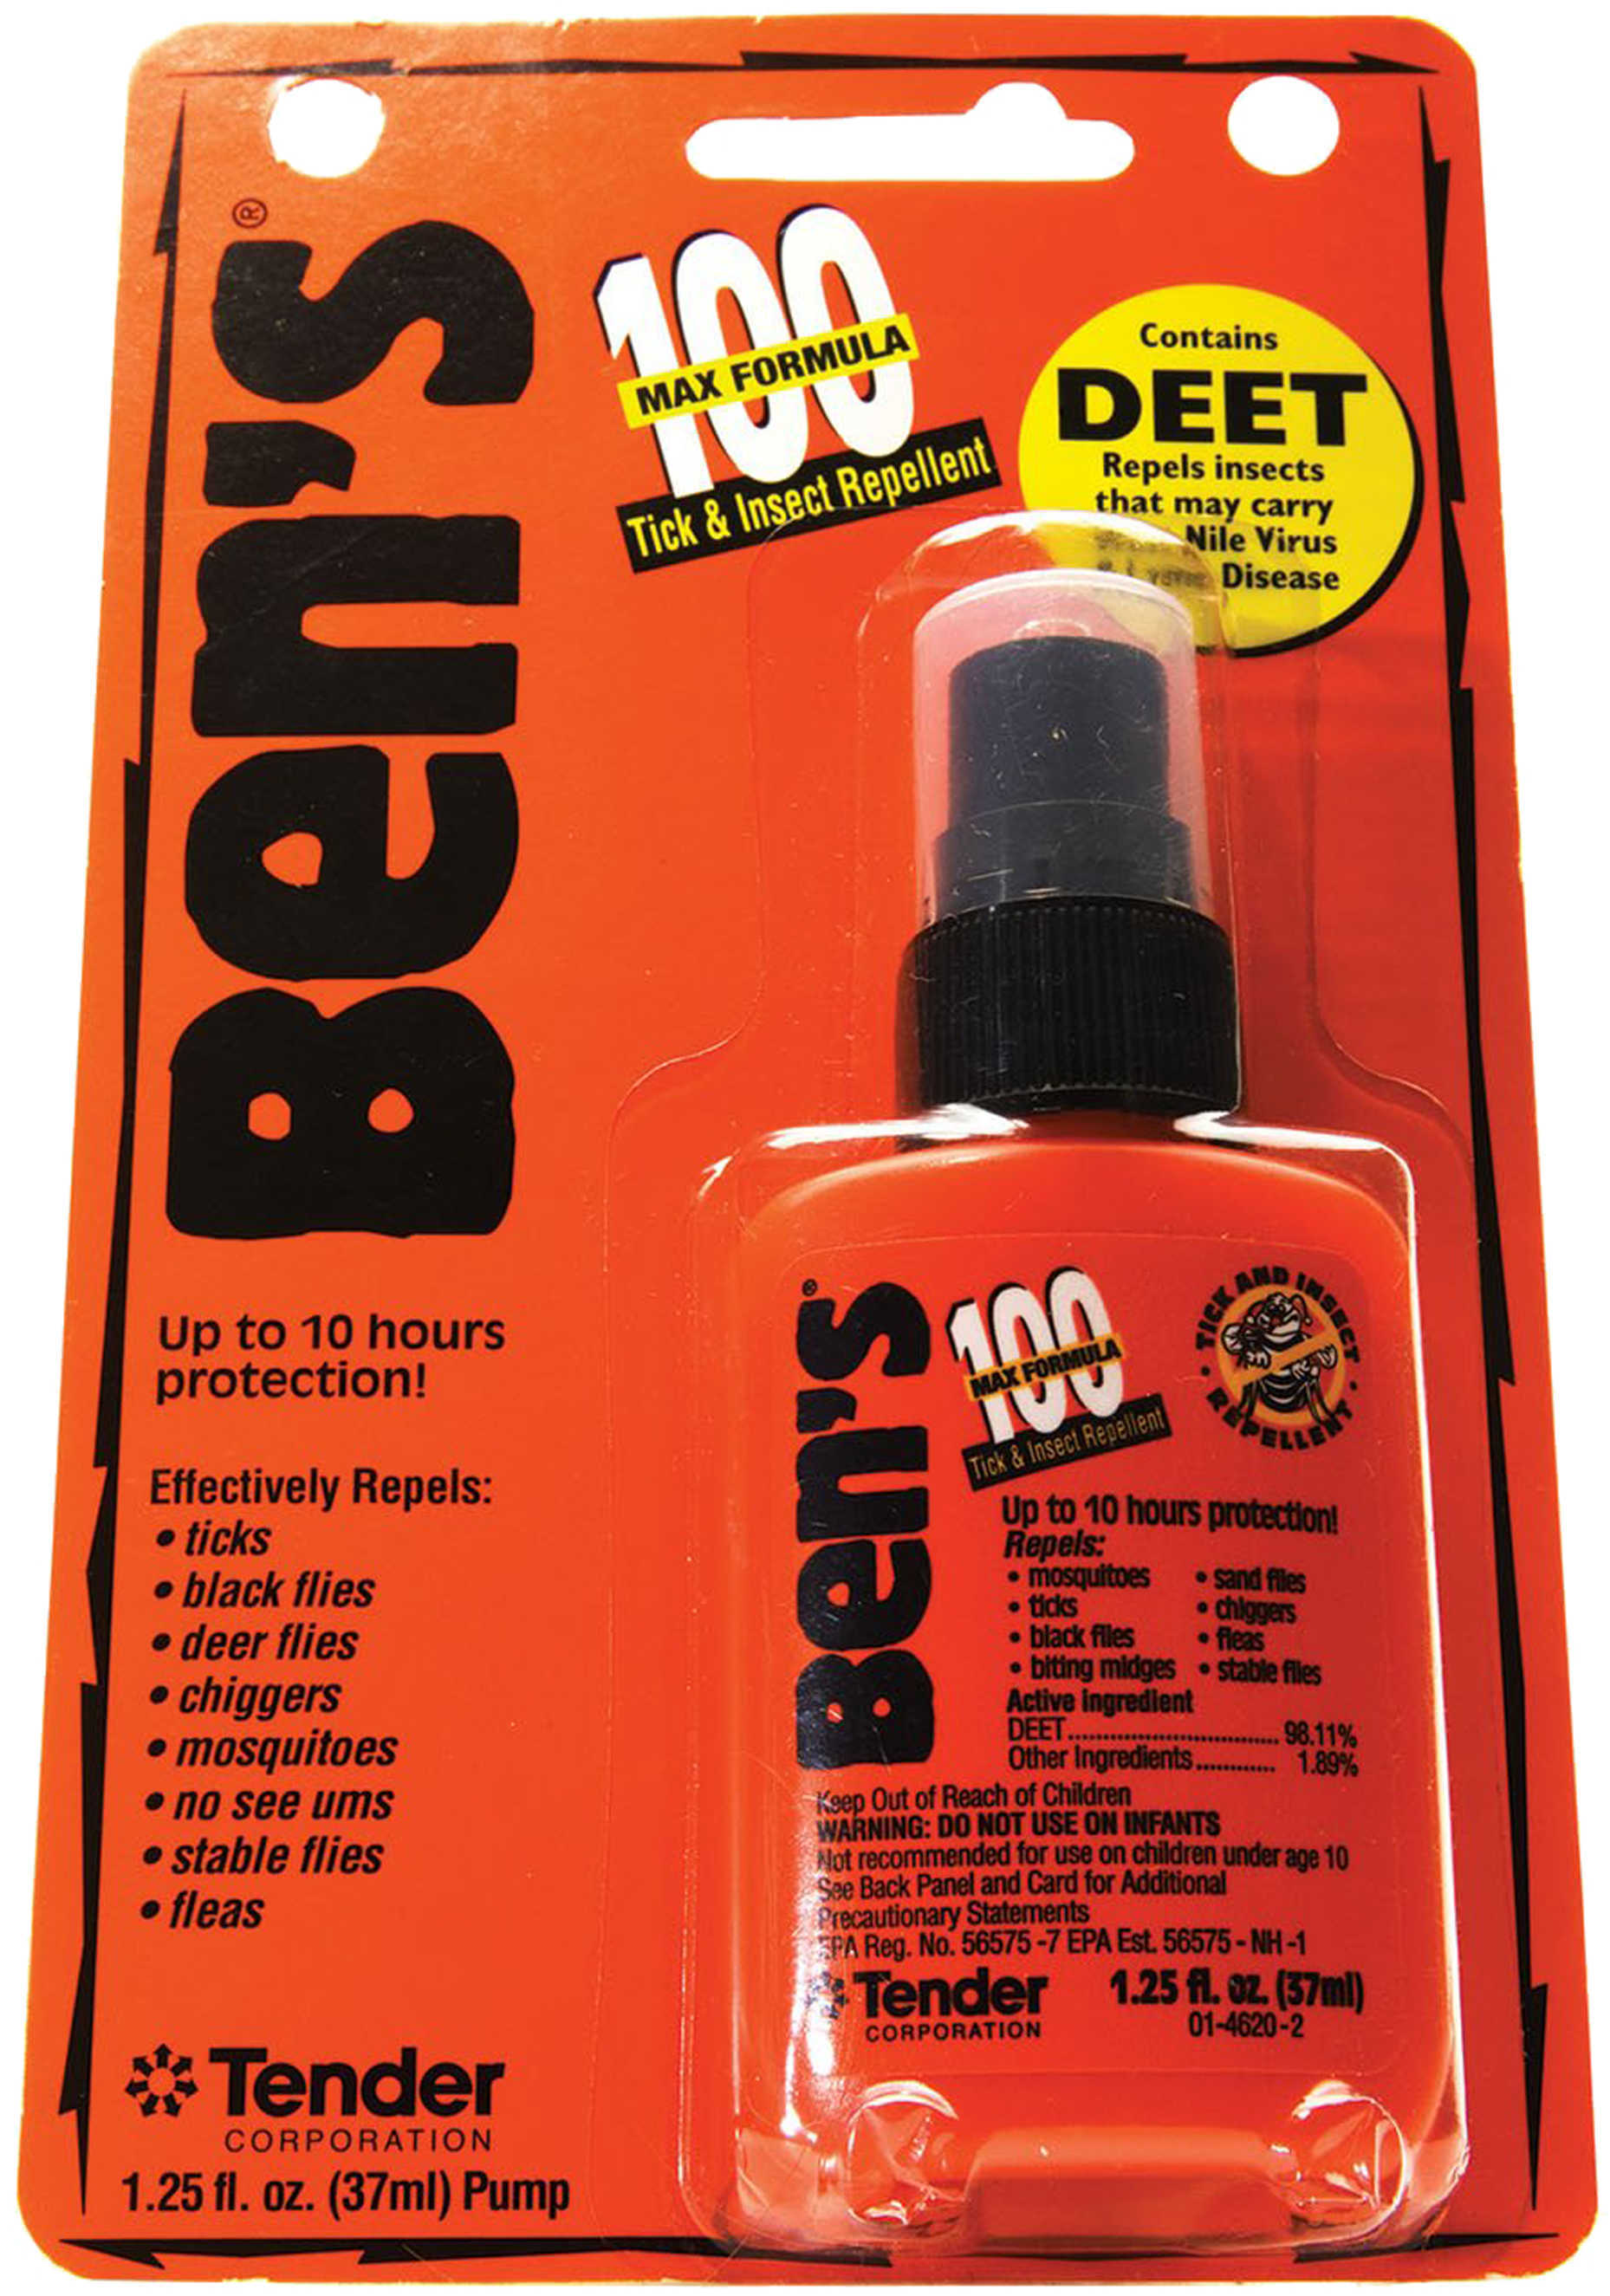 Bens / Tender Corp AMK 100 INSECT Repellent 100% DEET 1.25Oz Pump (CARDED)